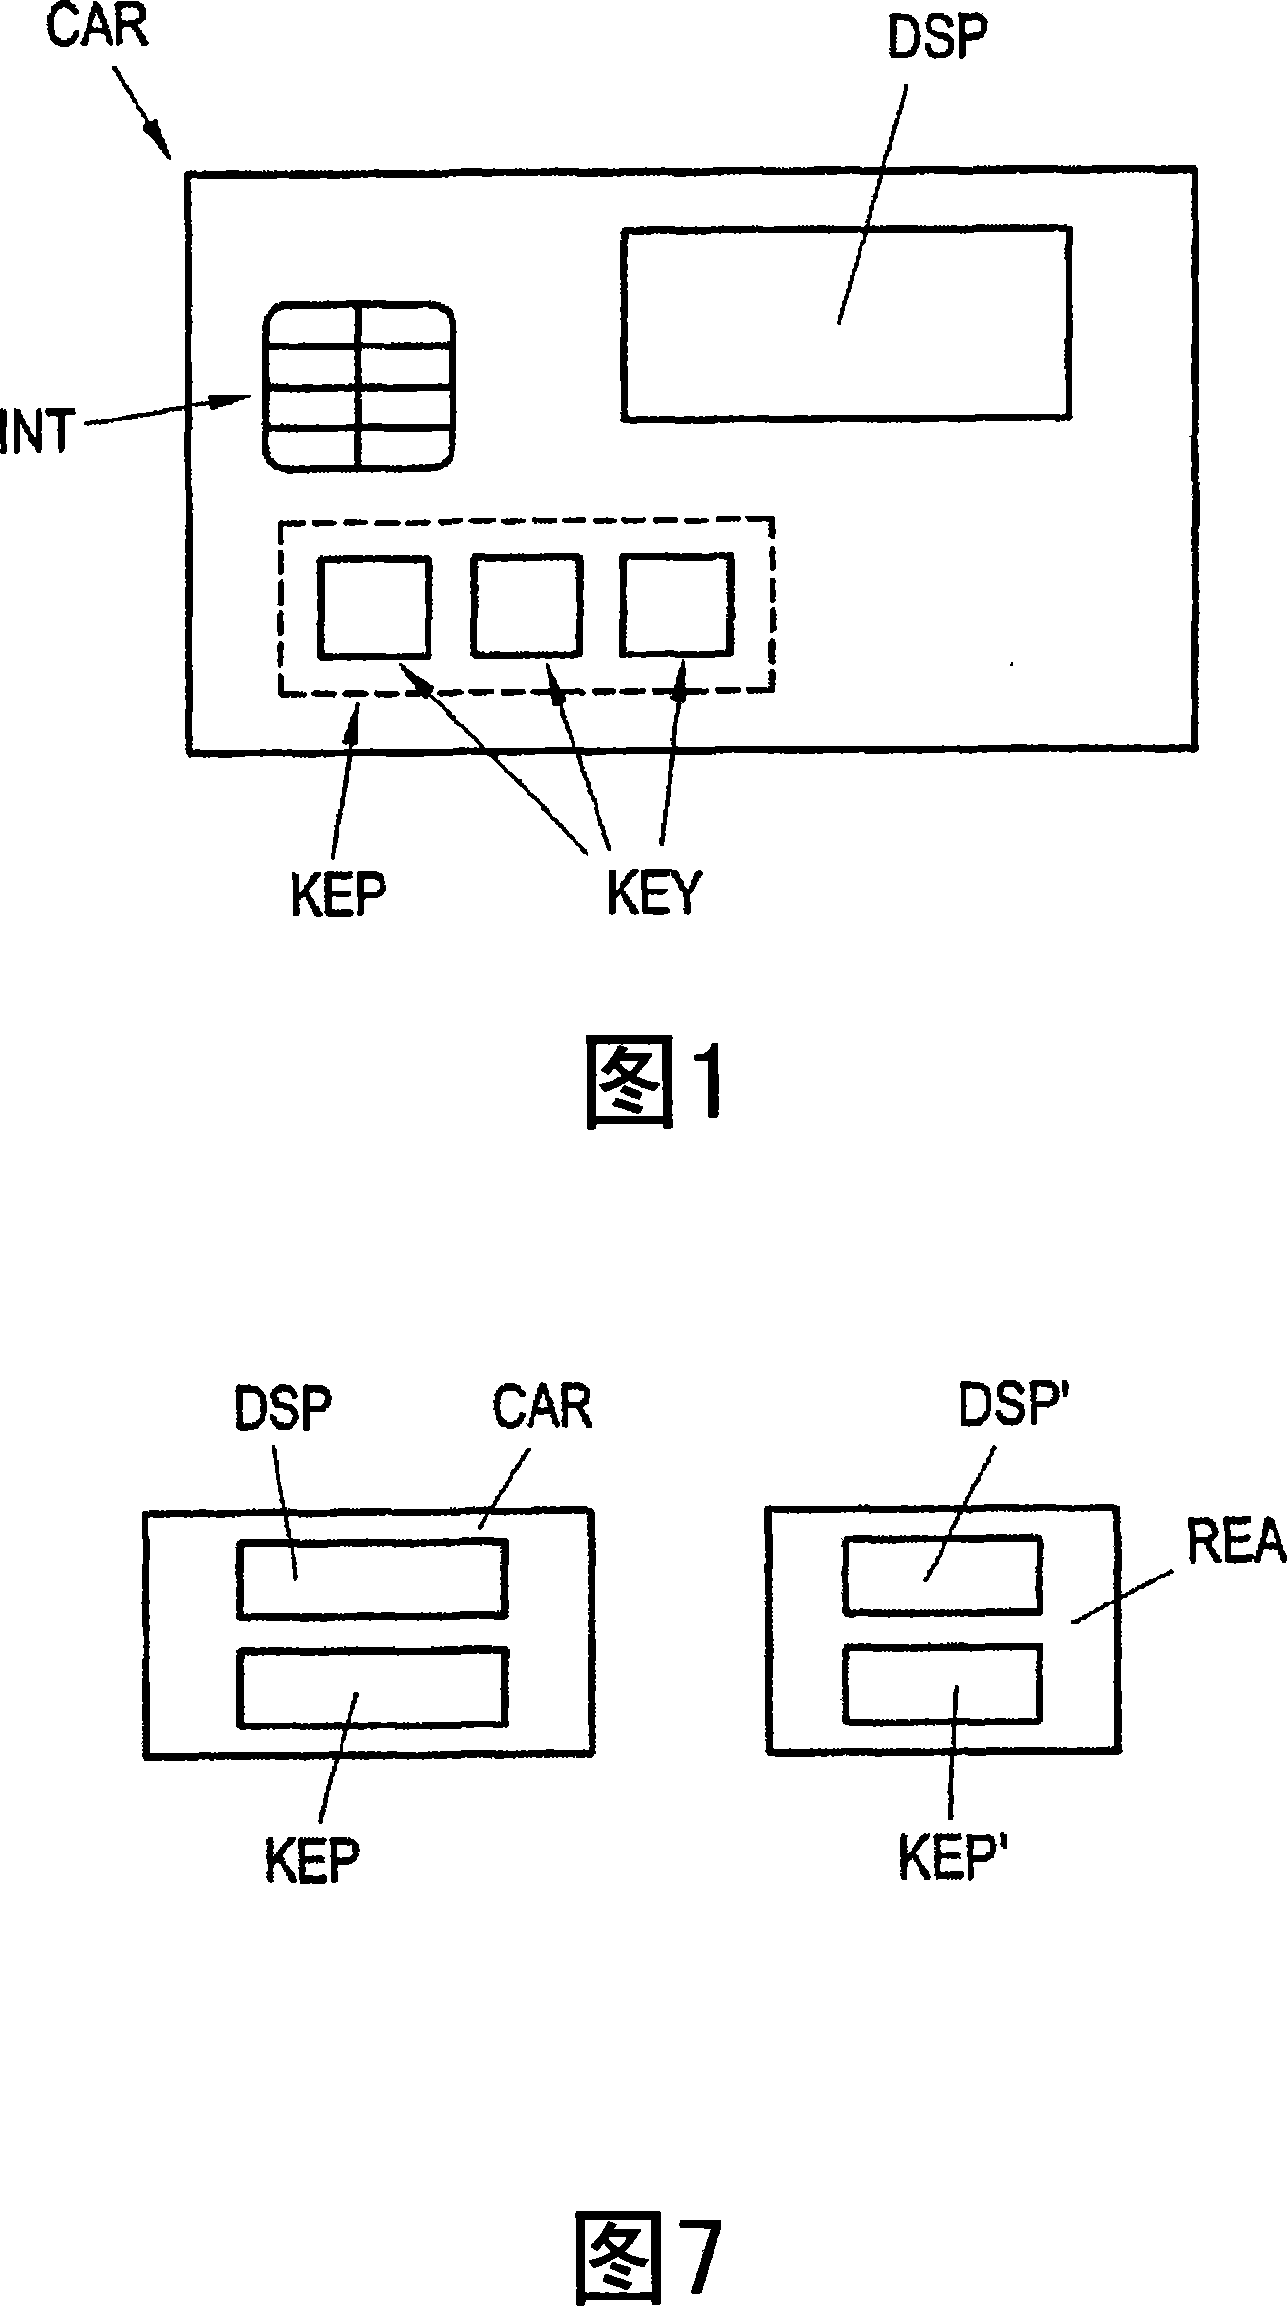 Card with input elements for entering a PIN code and method of entering a PIN code